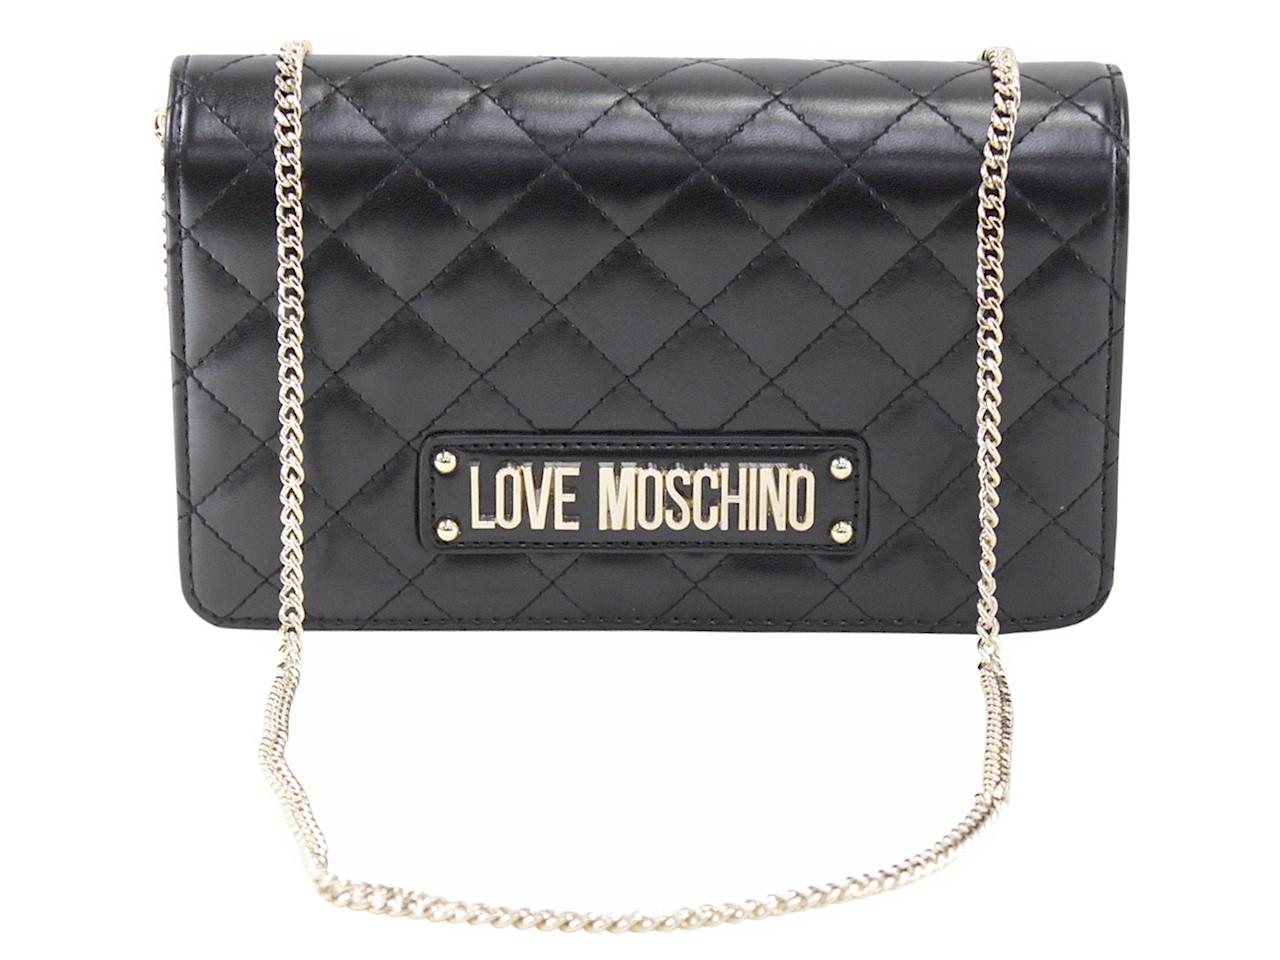 Love Moschino Women's Logo Shoulder Bag with Chain Strap 